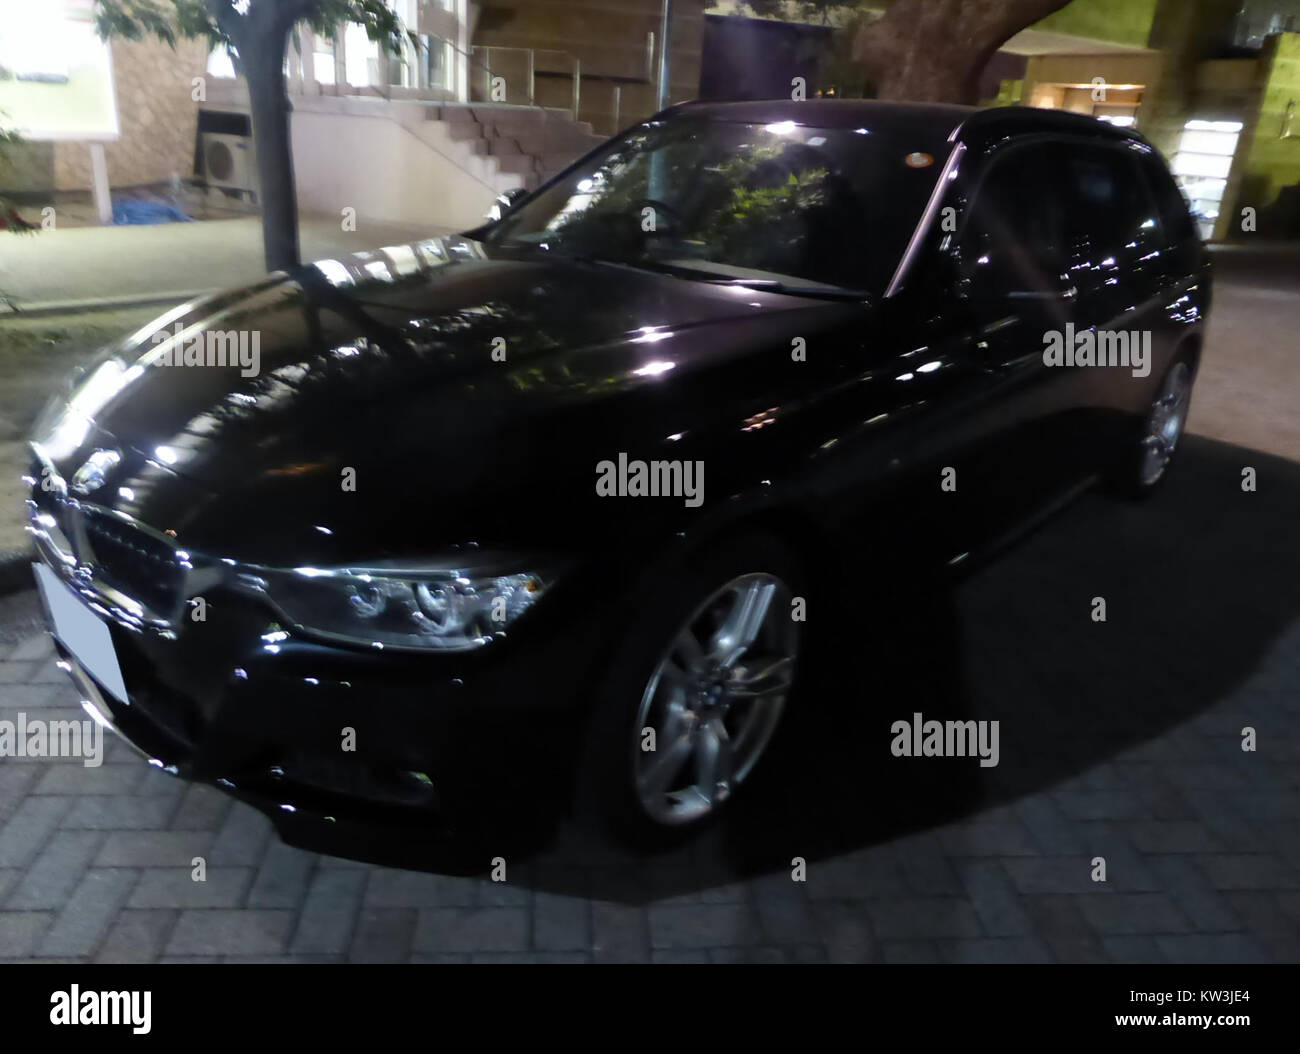 BMW 320d Touring (F31) at night front Stock Photo - Alamy